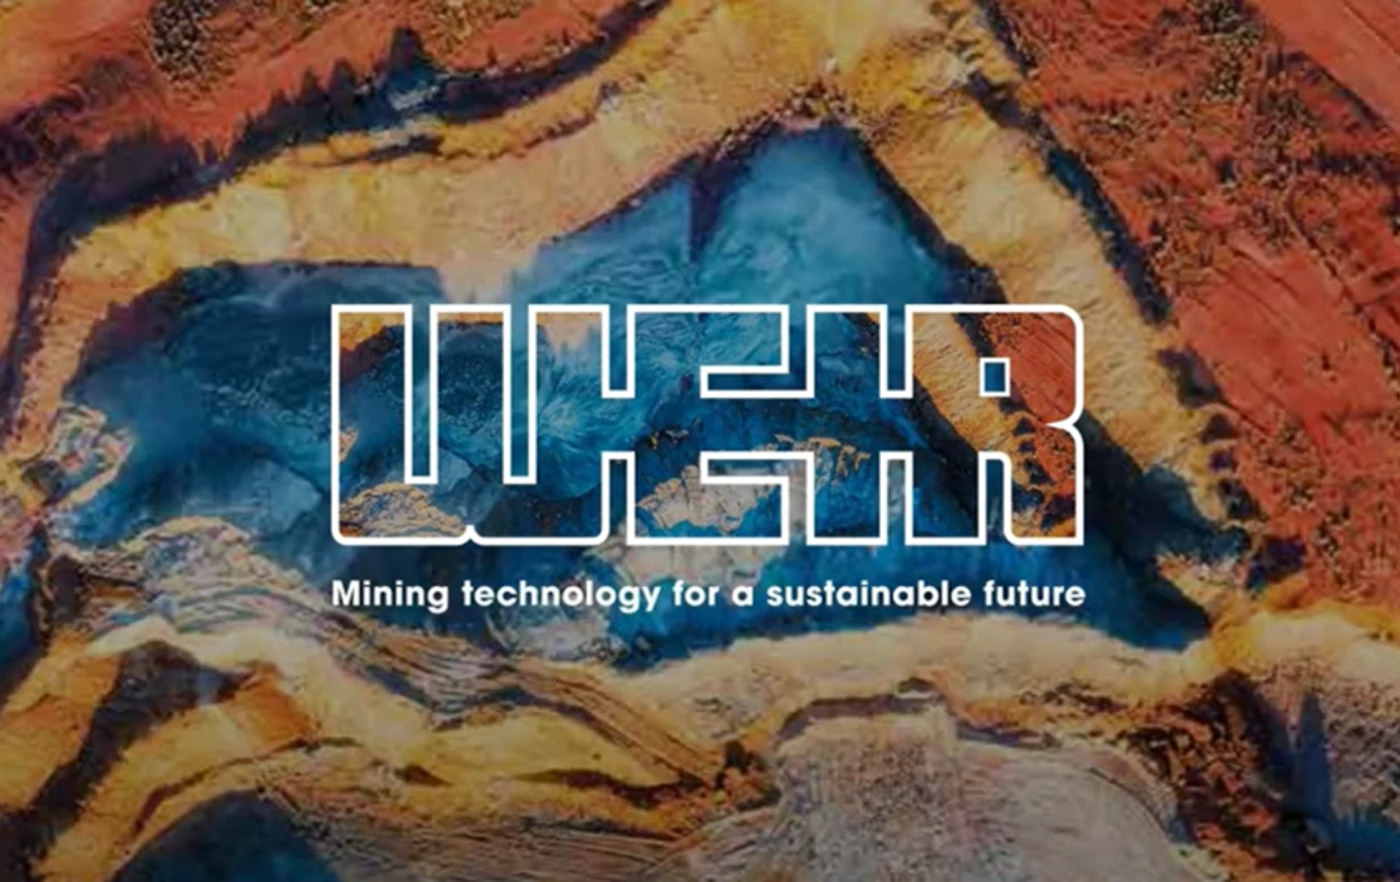 How Weir is Harnessing Mining Technology for a Sustainable Future